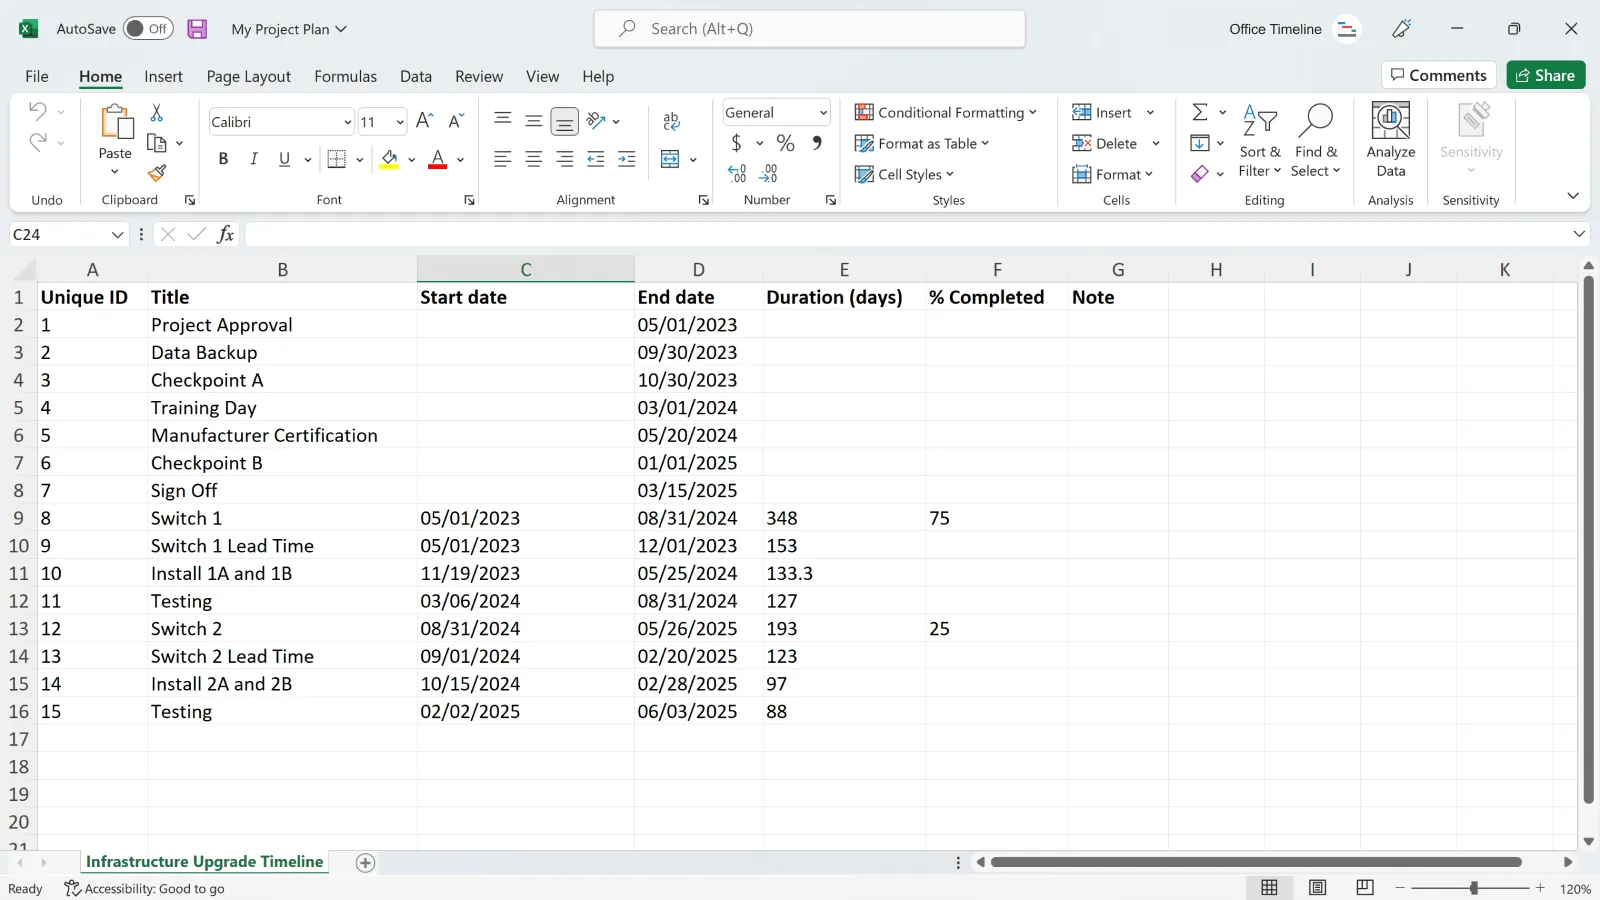 Excel data for importing into Office Timeline